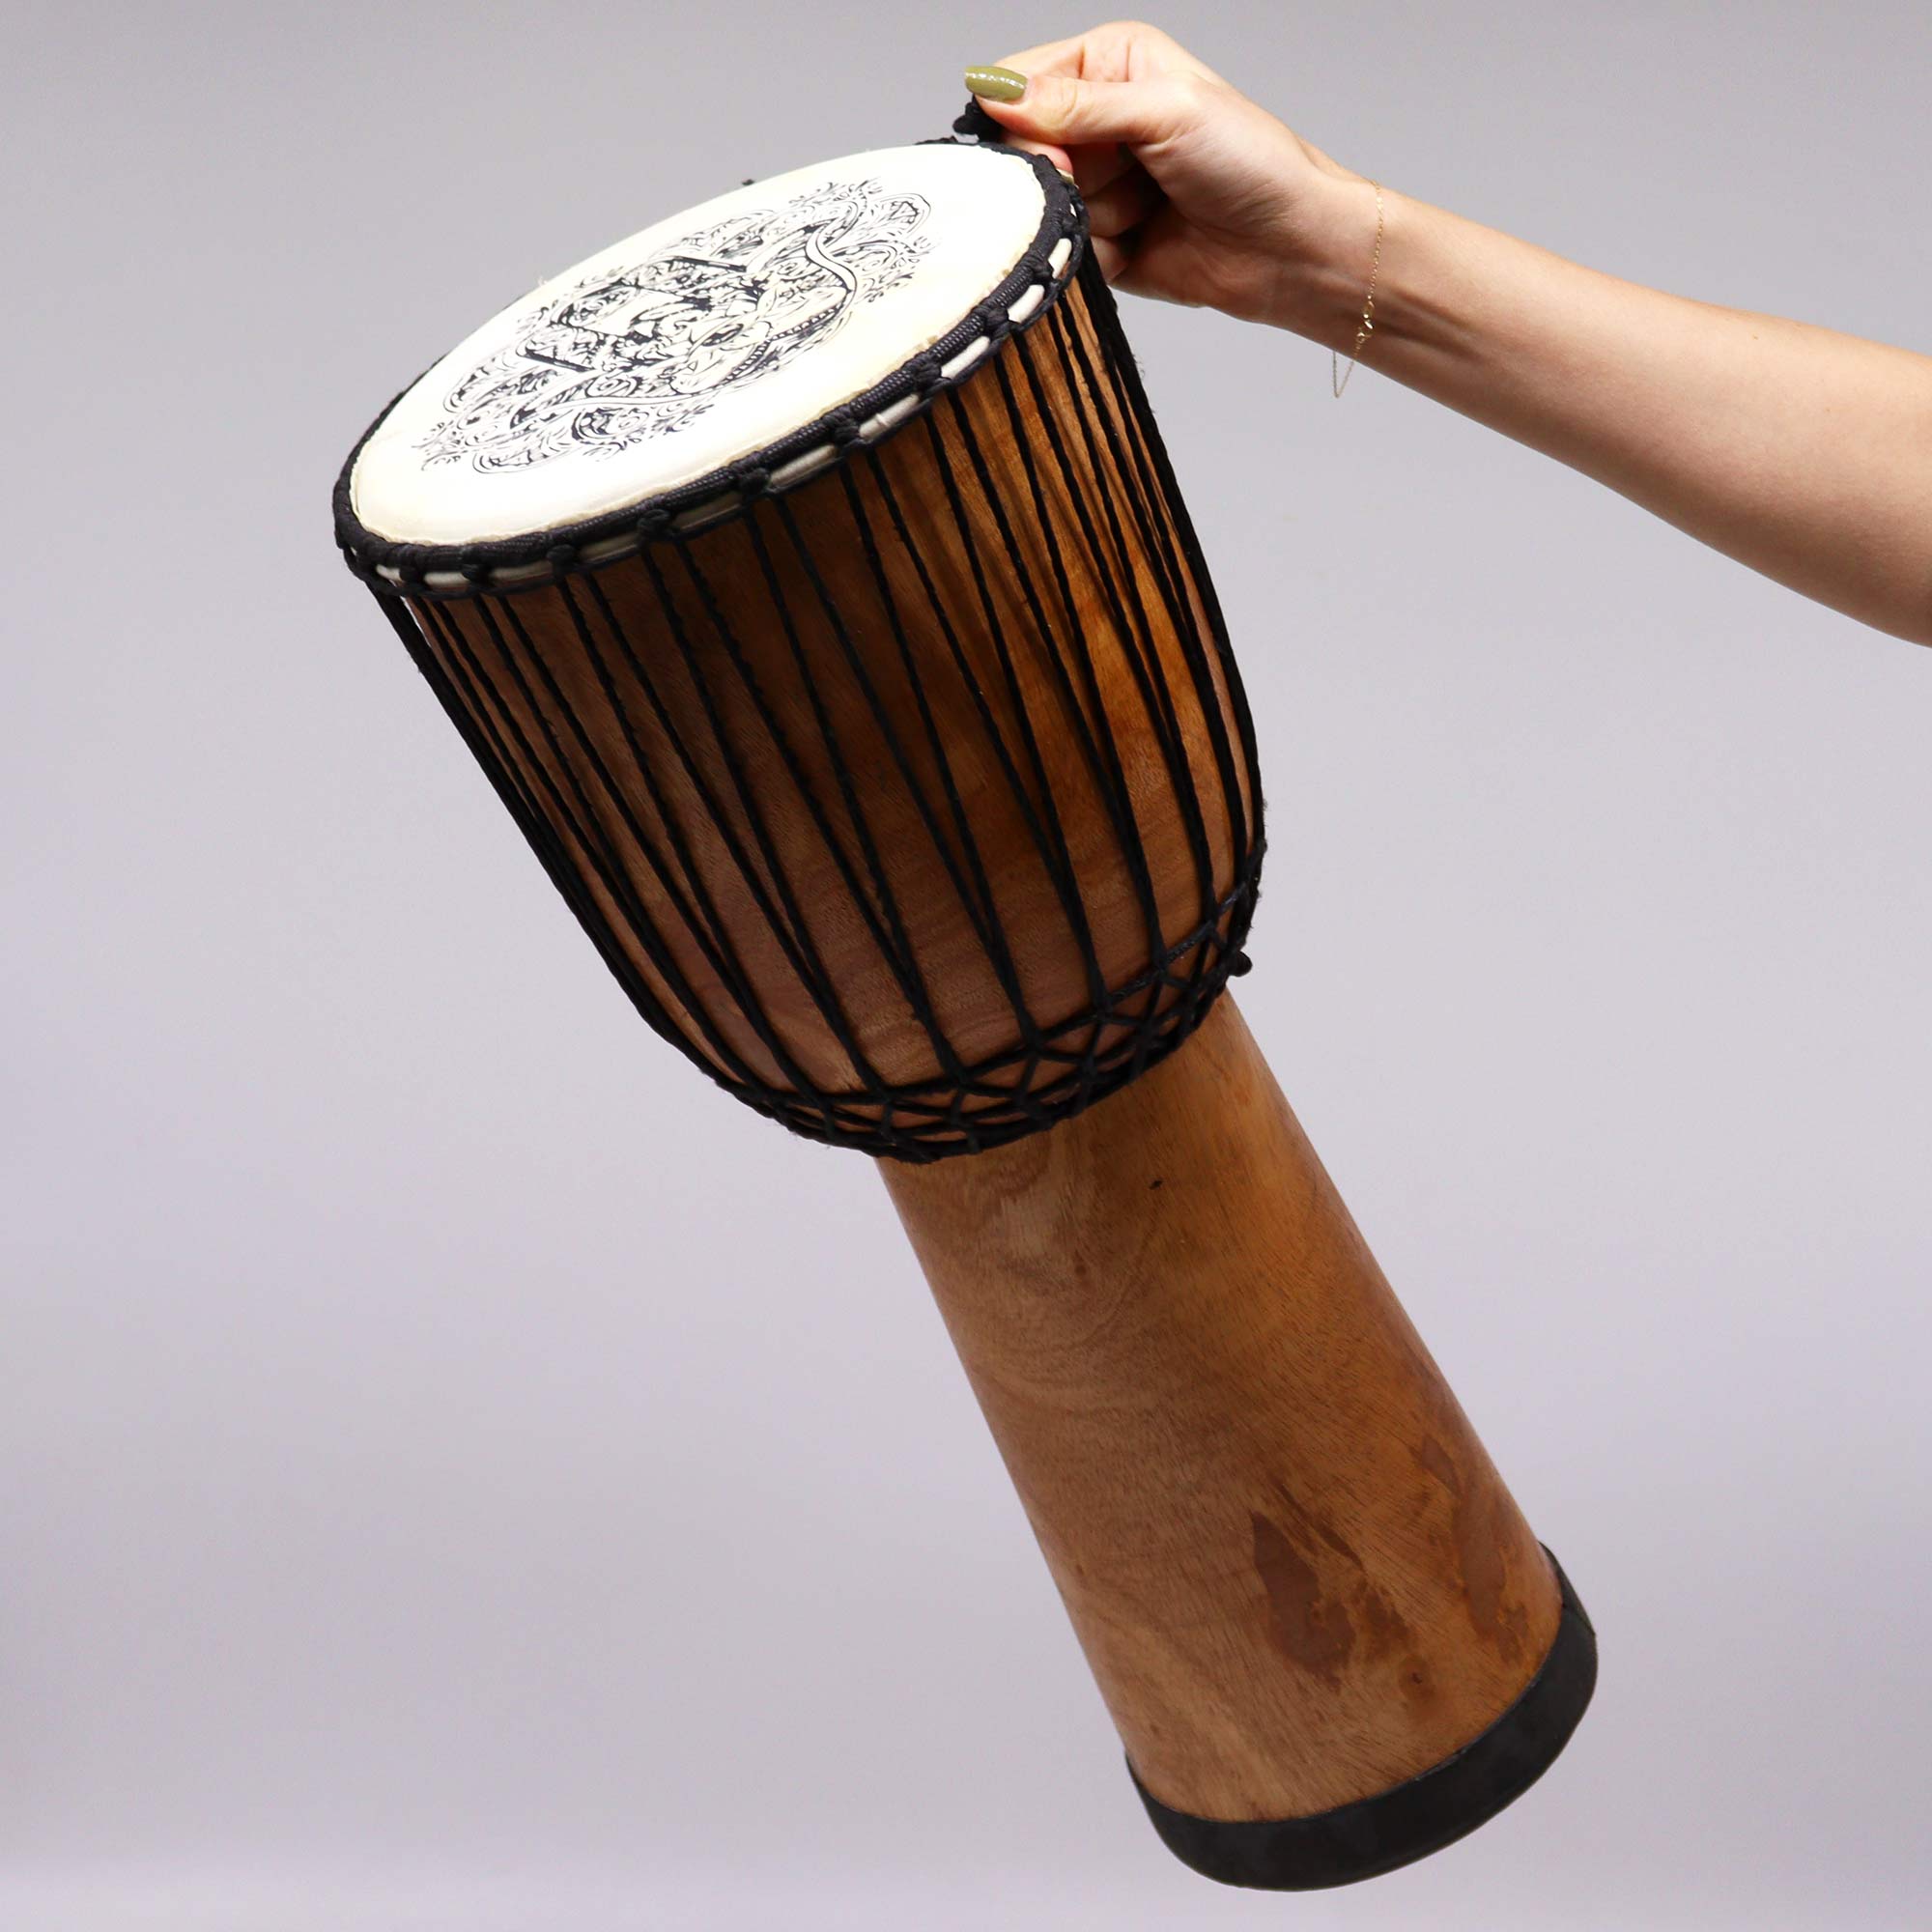 Hamsa Wide Top Djembe Drum - 20 inches